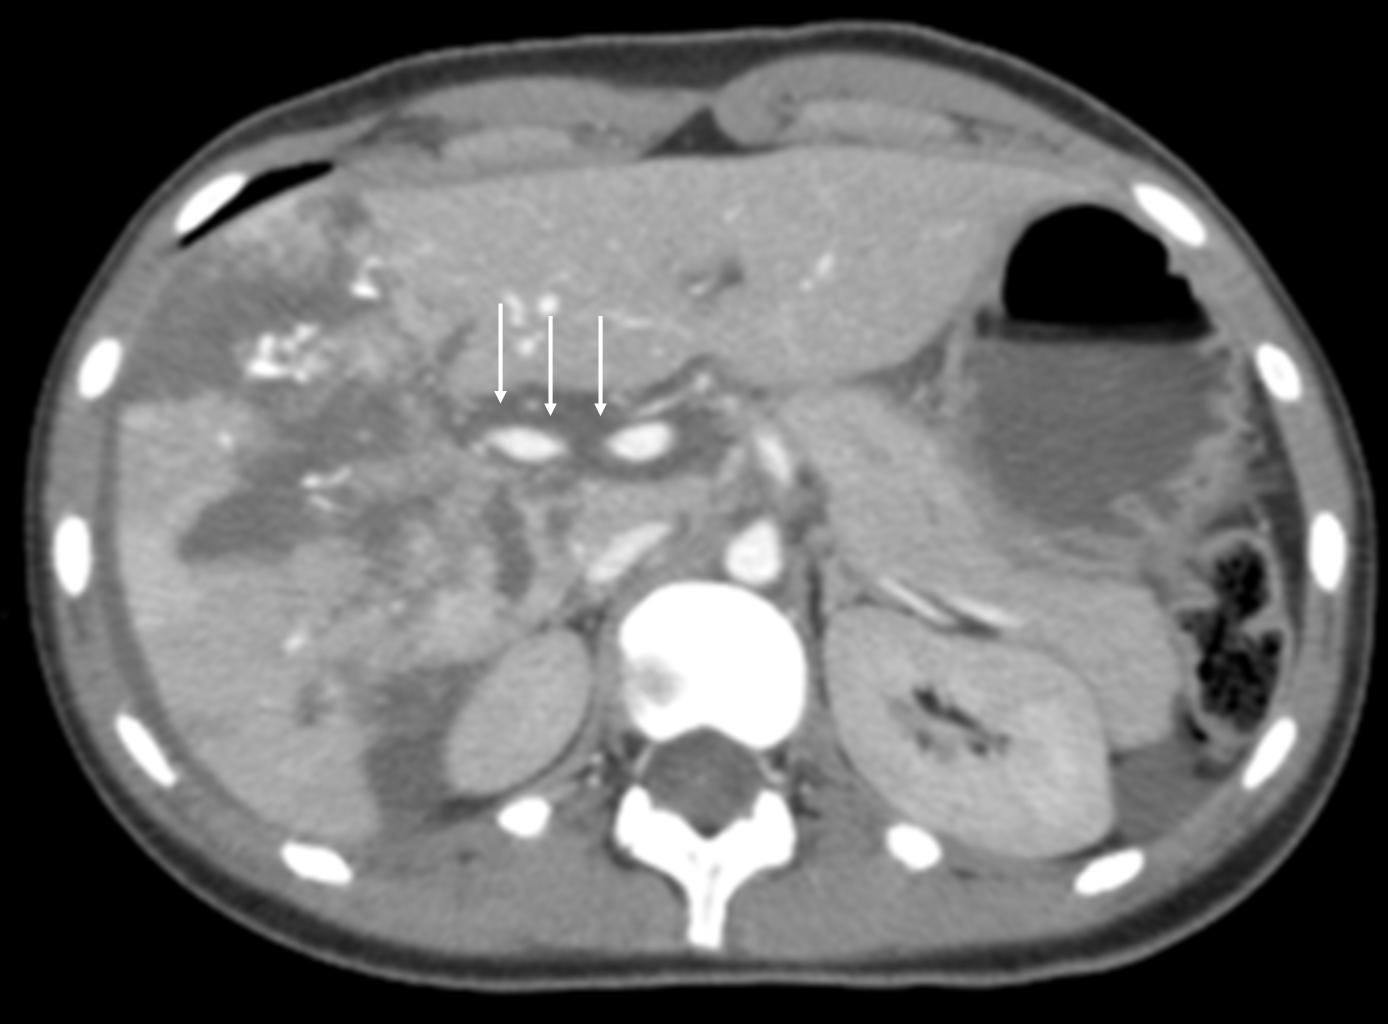 Effective use of abdominal CT can save lives in emergency setting